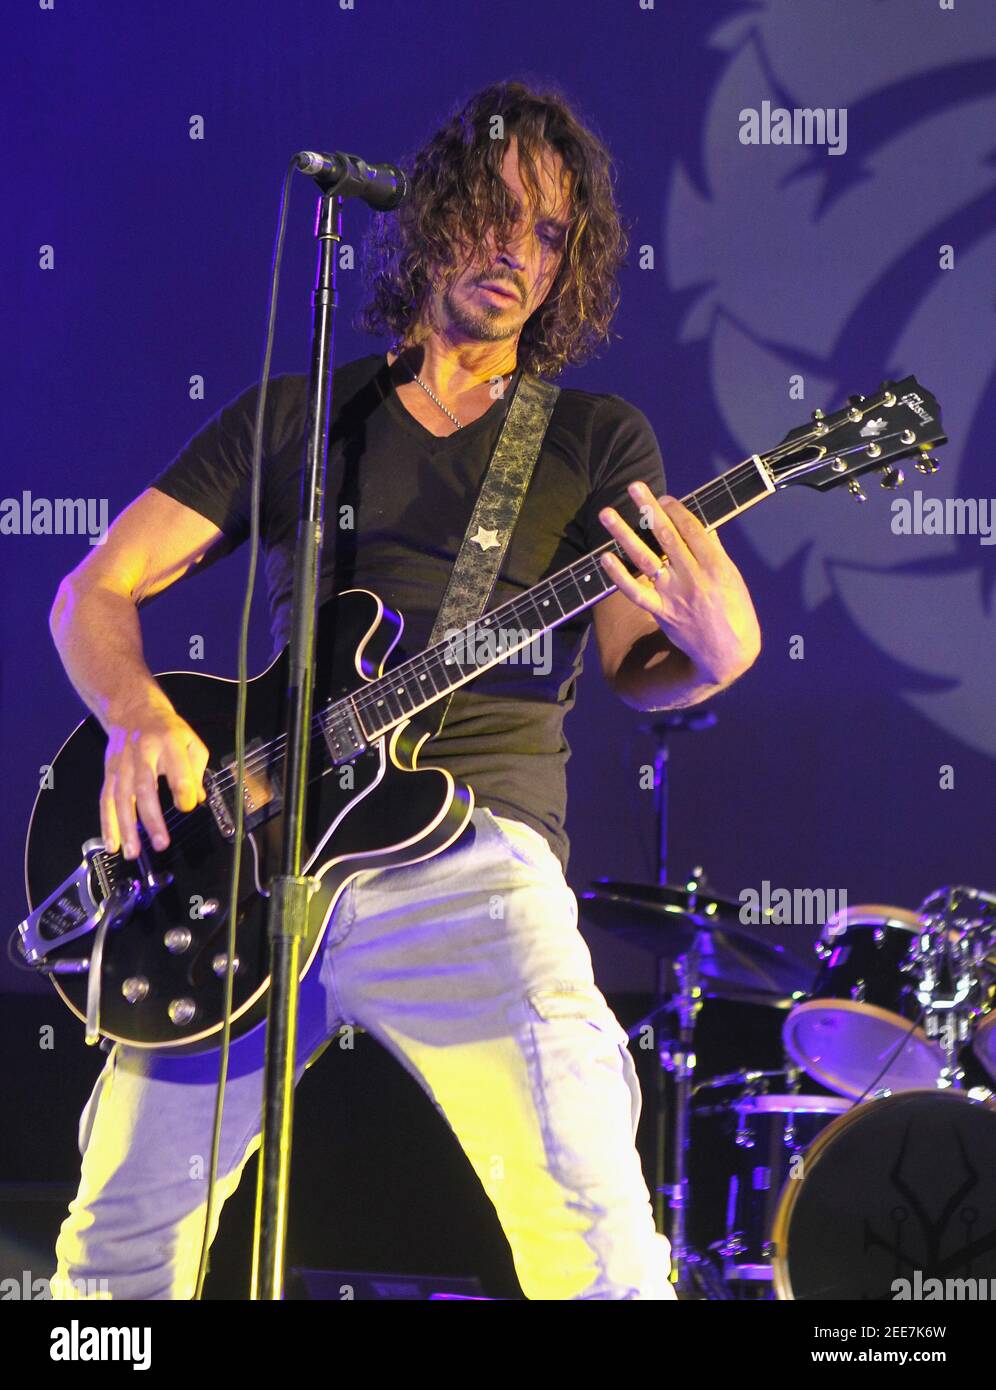 London, UK. 18th September 2013. Chris Cornell of Soundgarden performs on stage at Brixton Academy in London. UK. Stock Photo